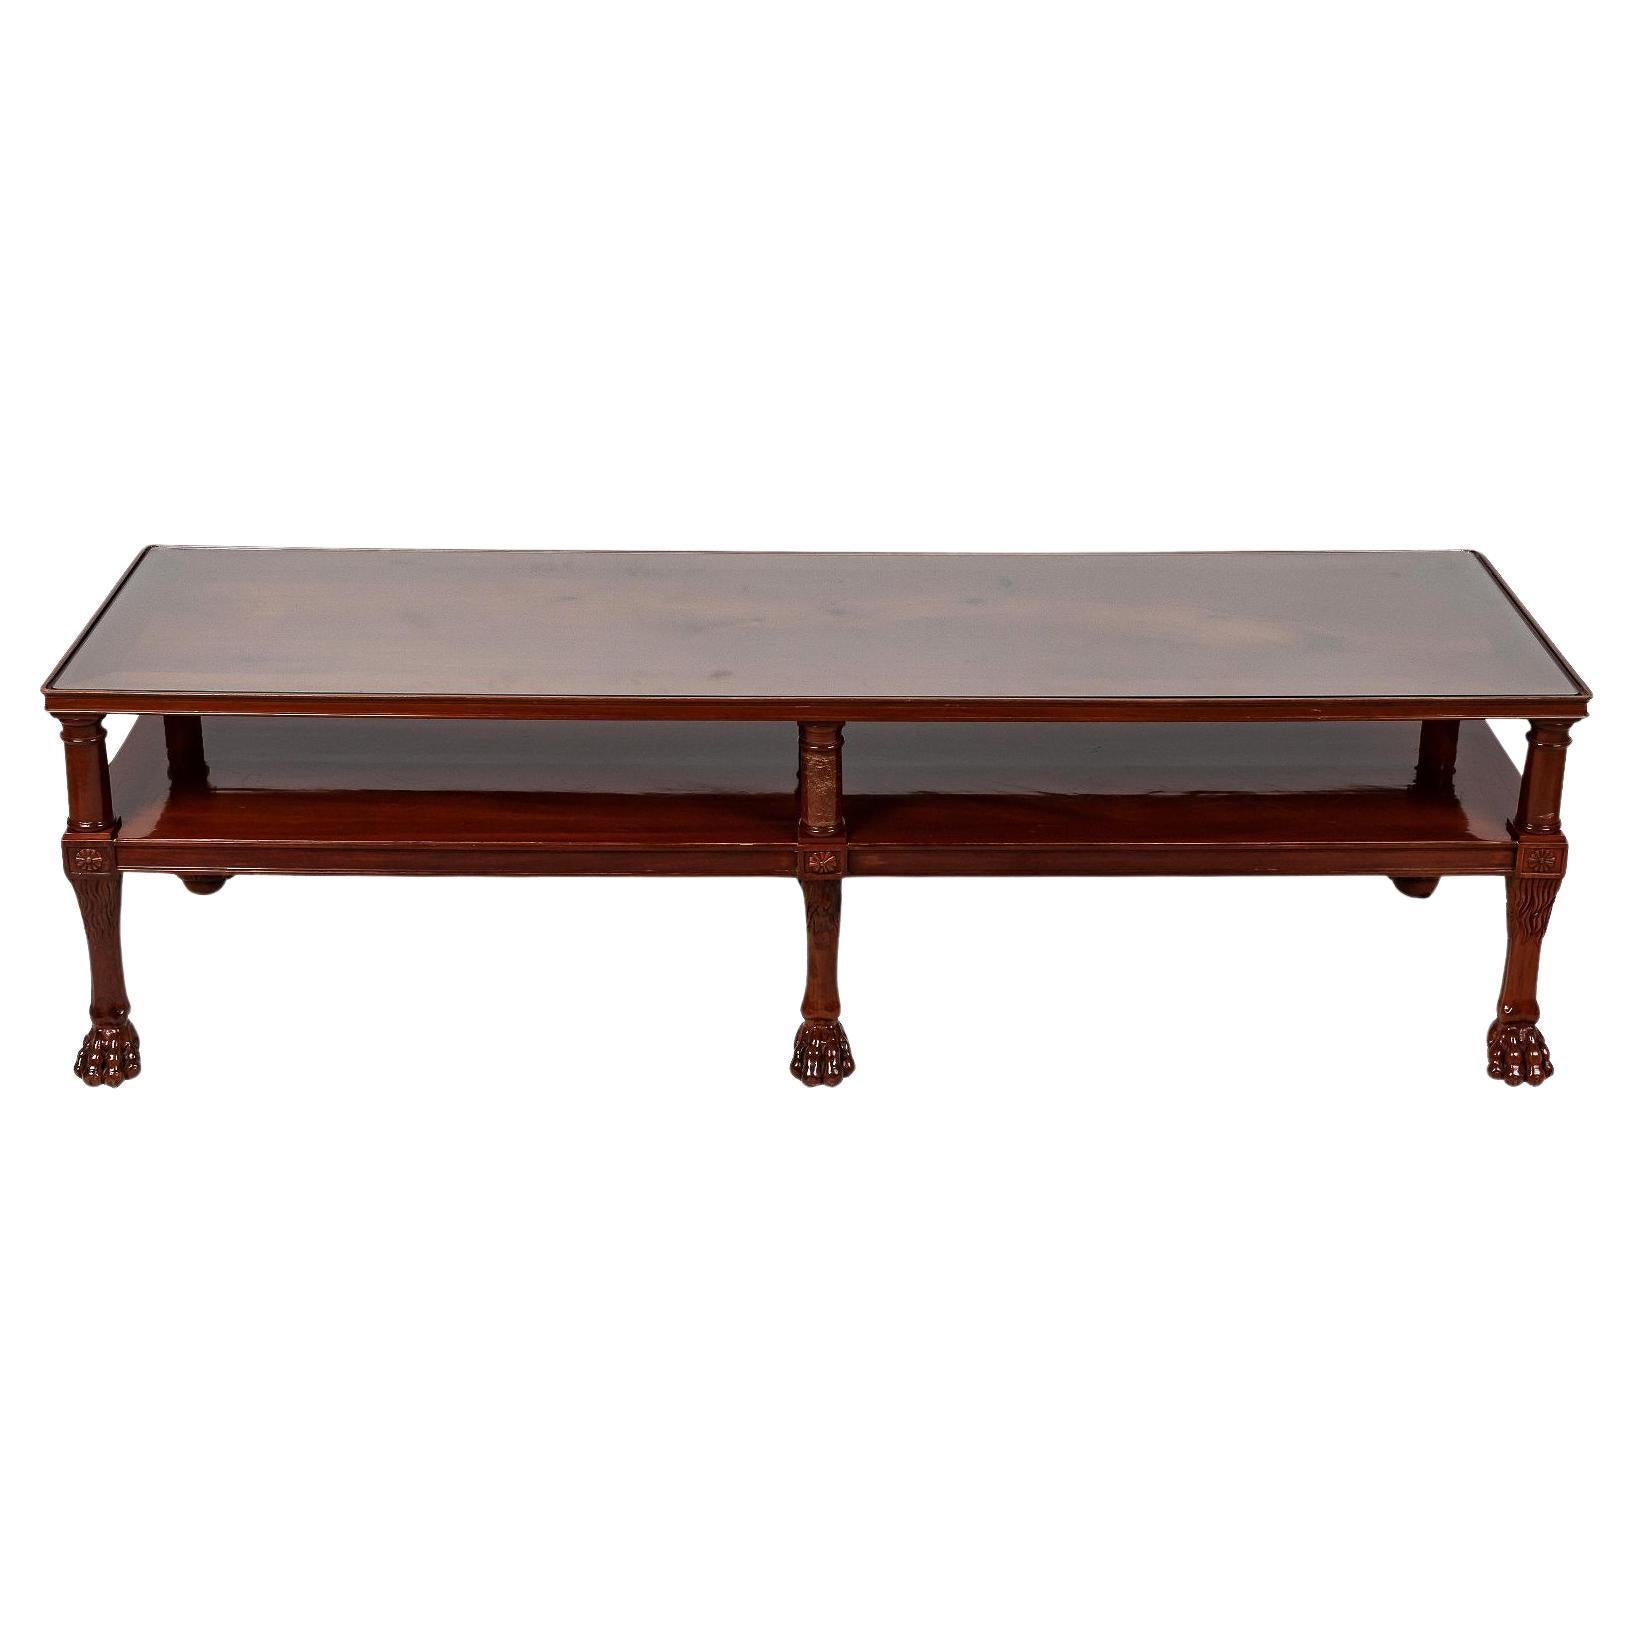 Pr of Reduced French Empire Yew Wood Banquette Tables Designed by Jacob Freres  For Sale